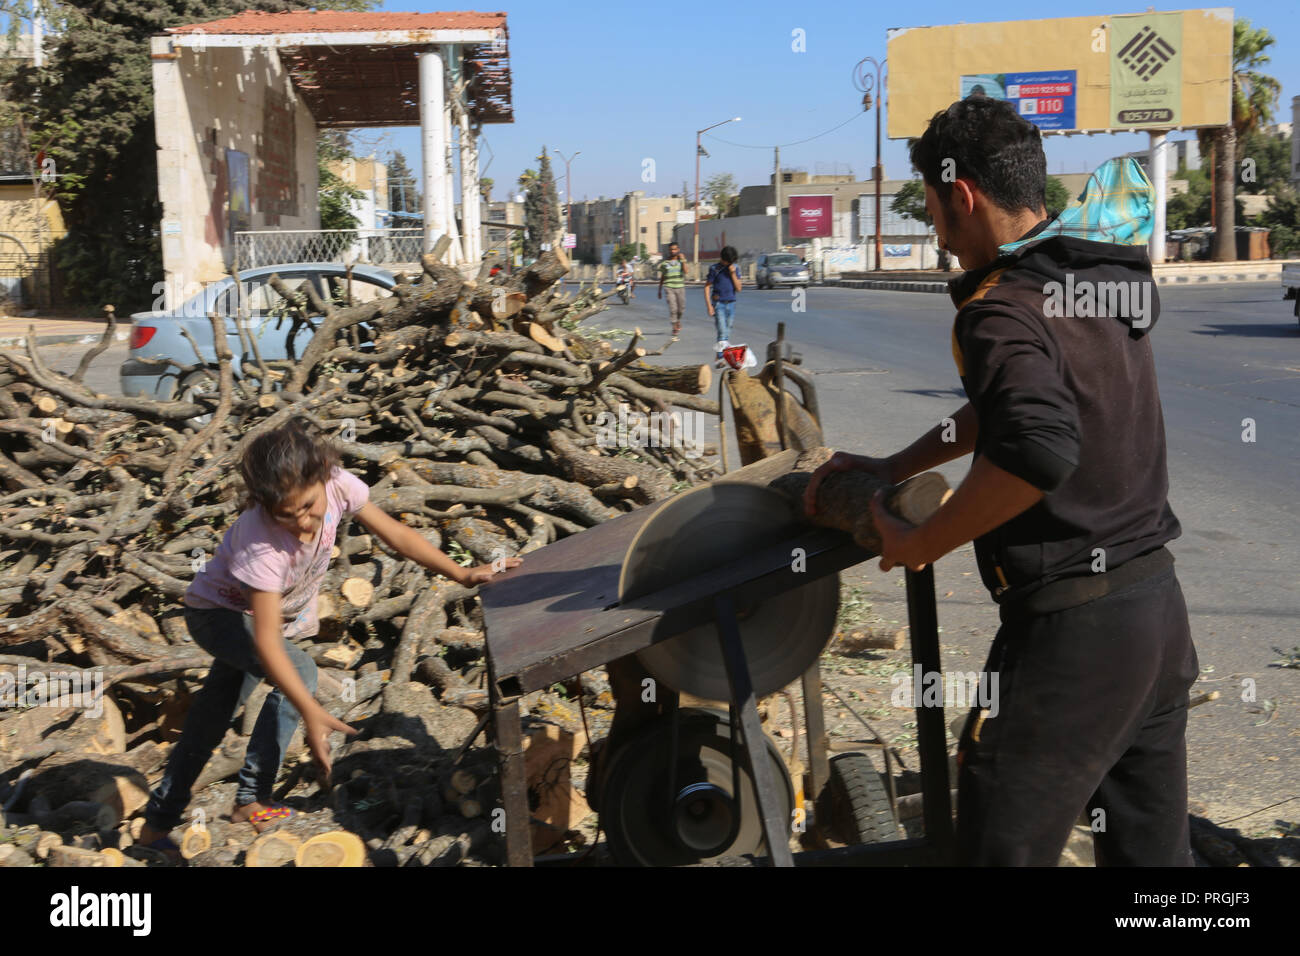 September 14, 2018 - Syrians in the city of Idlib chop forest wood with a chainsaw to prepare firewood for heating. Many Syrians resort to logs for heating as with the conflict the price of diesel has risen from approximately $28 to approximately $100 per barrel, accompanied by a ten-fold devaluation of the Syrian currency. Before the onset of the conflict kerosene was mainly used in heating during the winter season in Idlib, but since the conflict started many Syrians have resorted to cutting down trees from nearby forests and woodlands to stay warm while facing fuel rocketing prices and fue Stock Photo